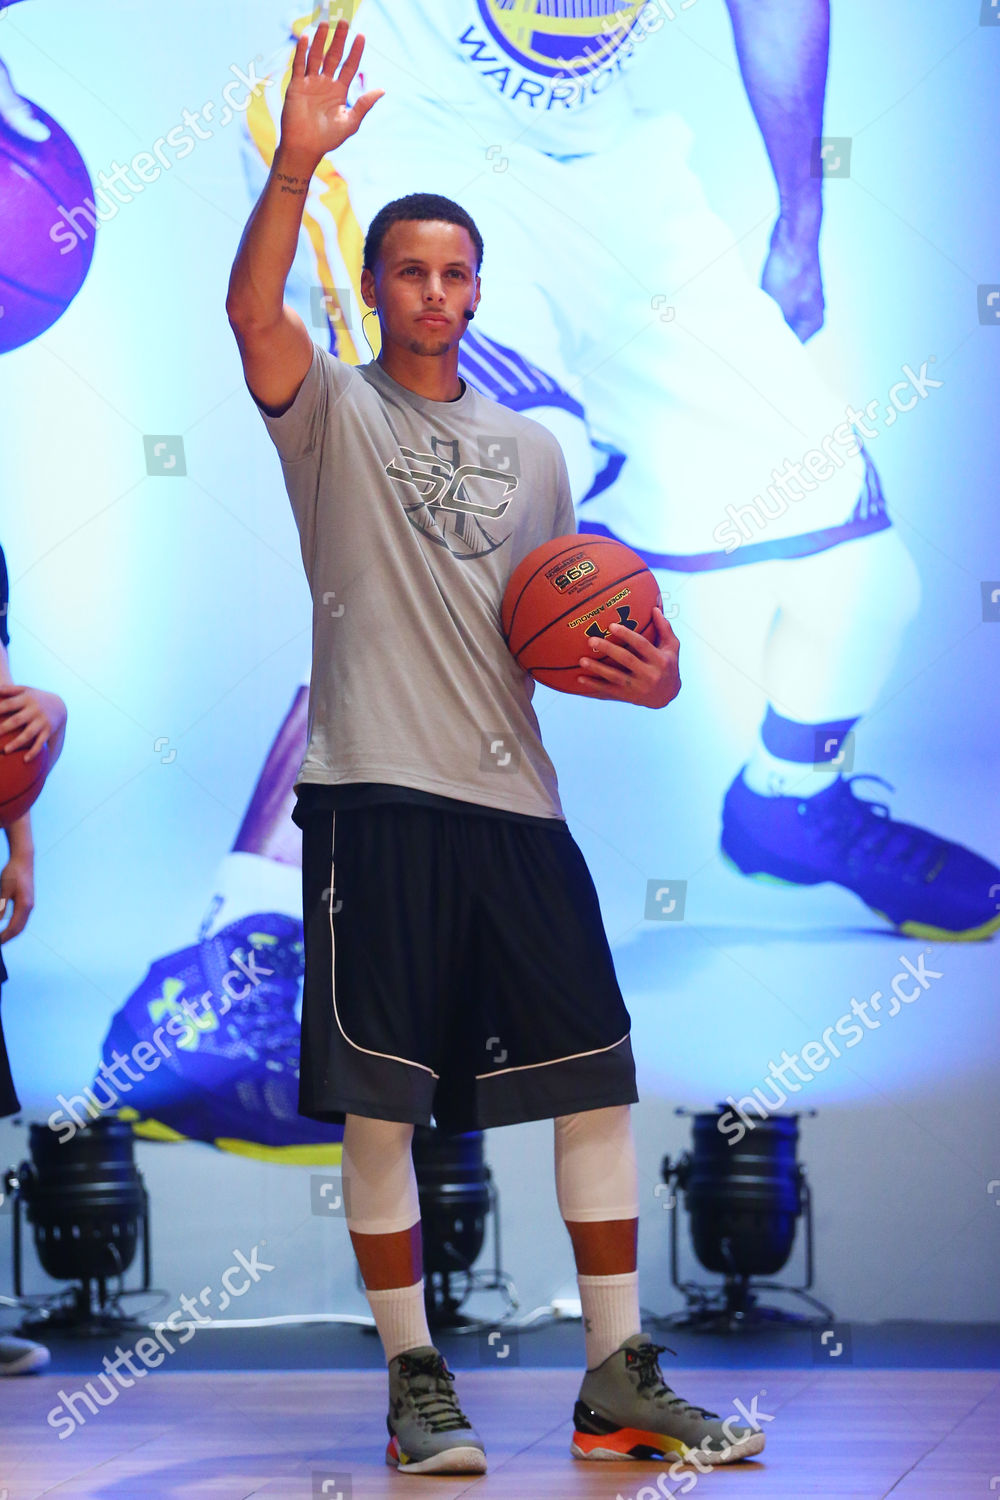 curry basketball shorts